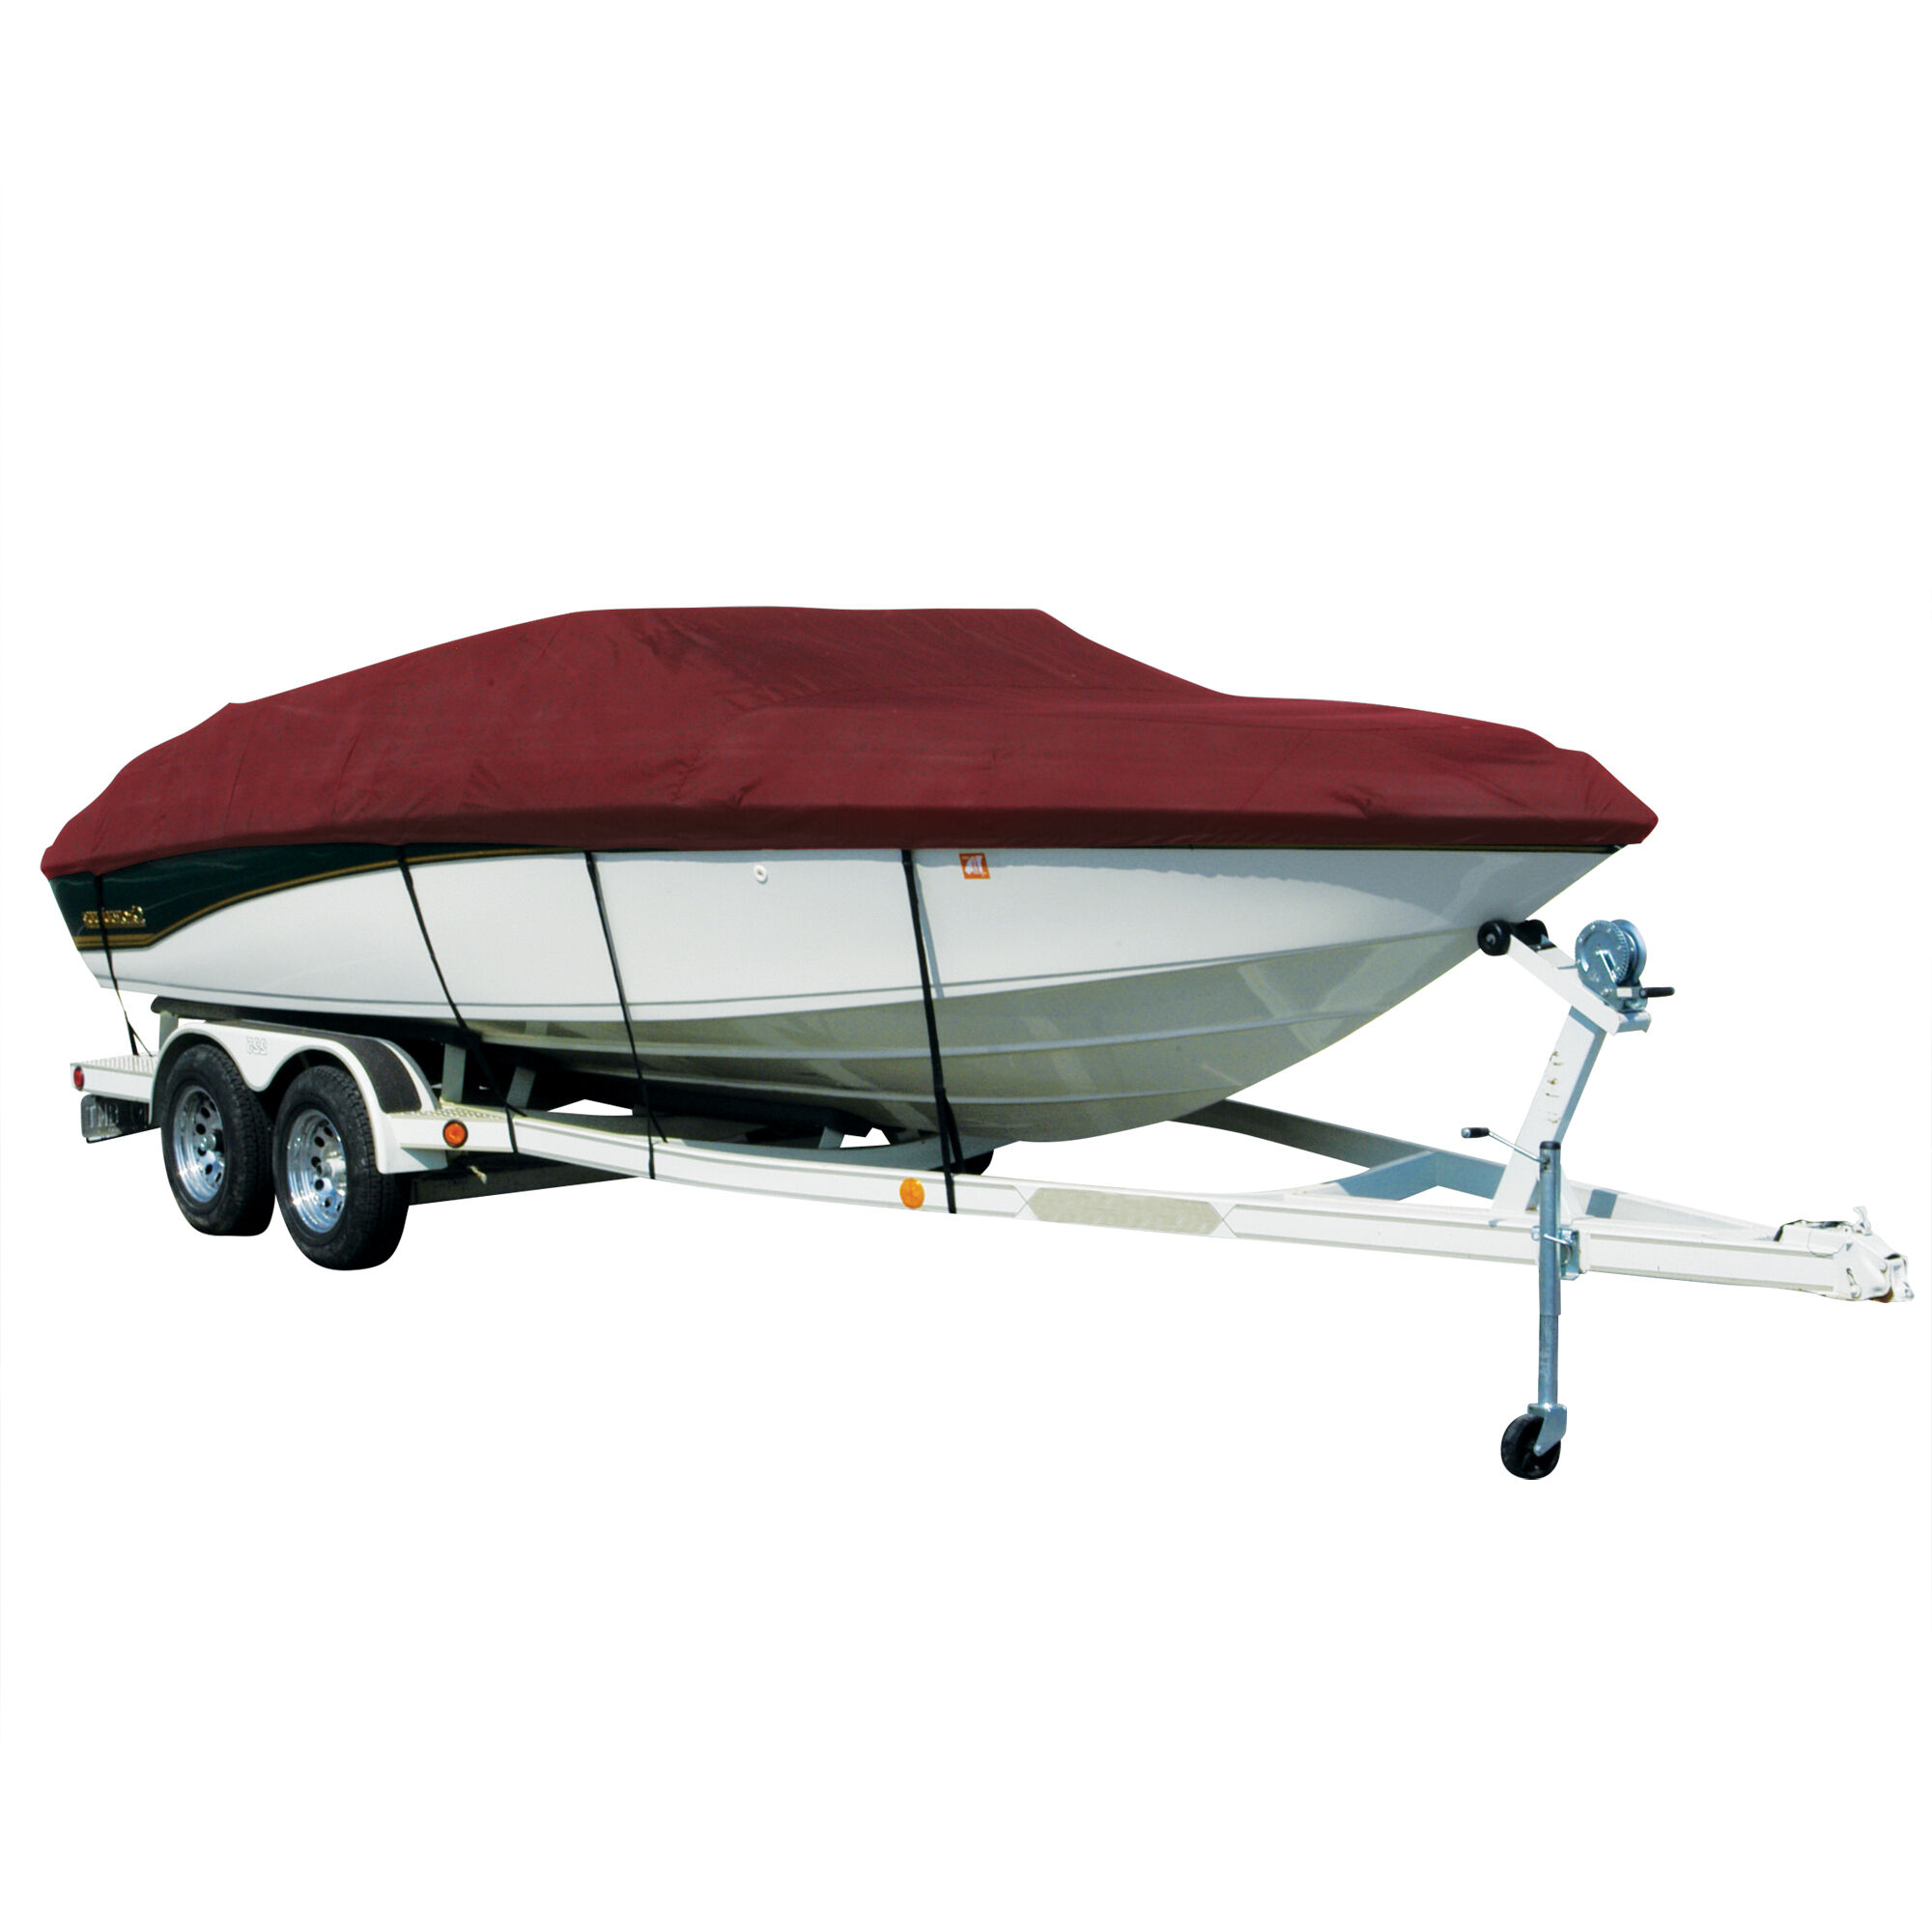 Covermate Exact Fit Sharkskin Boat Cover For BAYLINER CLASSIC 2452 CD HARD TOP in Burgundy